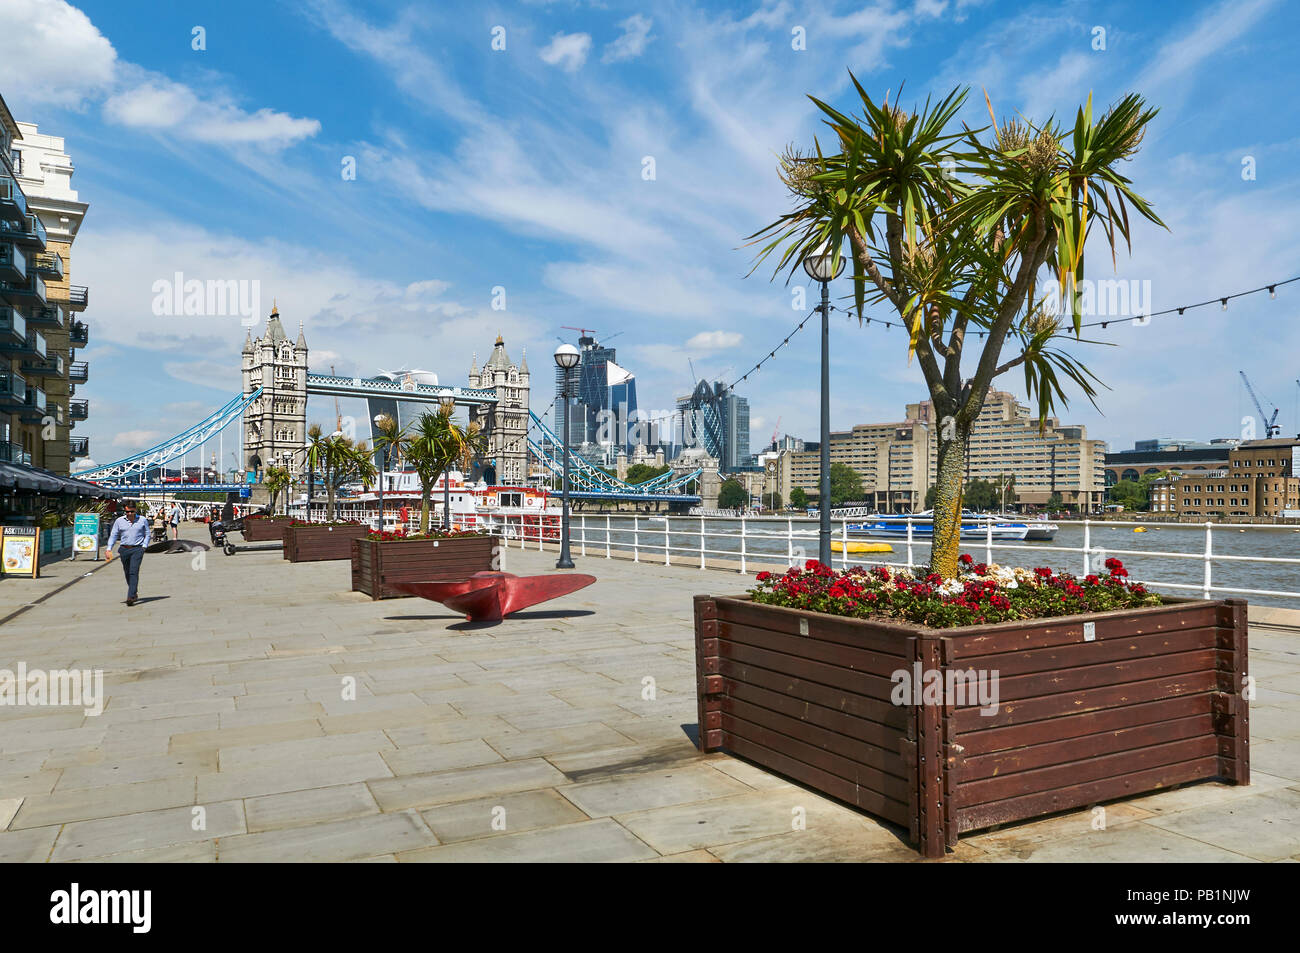 The newly pedestrianised riverside area behind Butlers Wharf buildings on the South Bank of the Thames, looking towards Tower Bridge, London UK Stock Photo